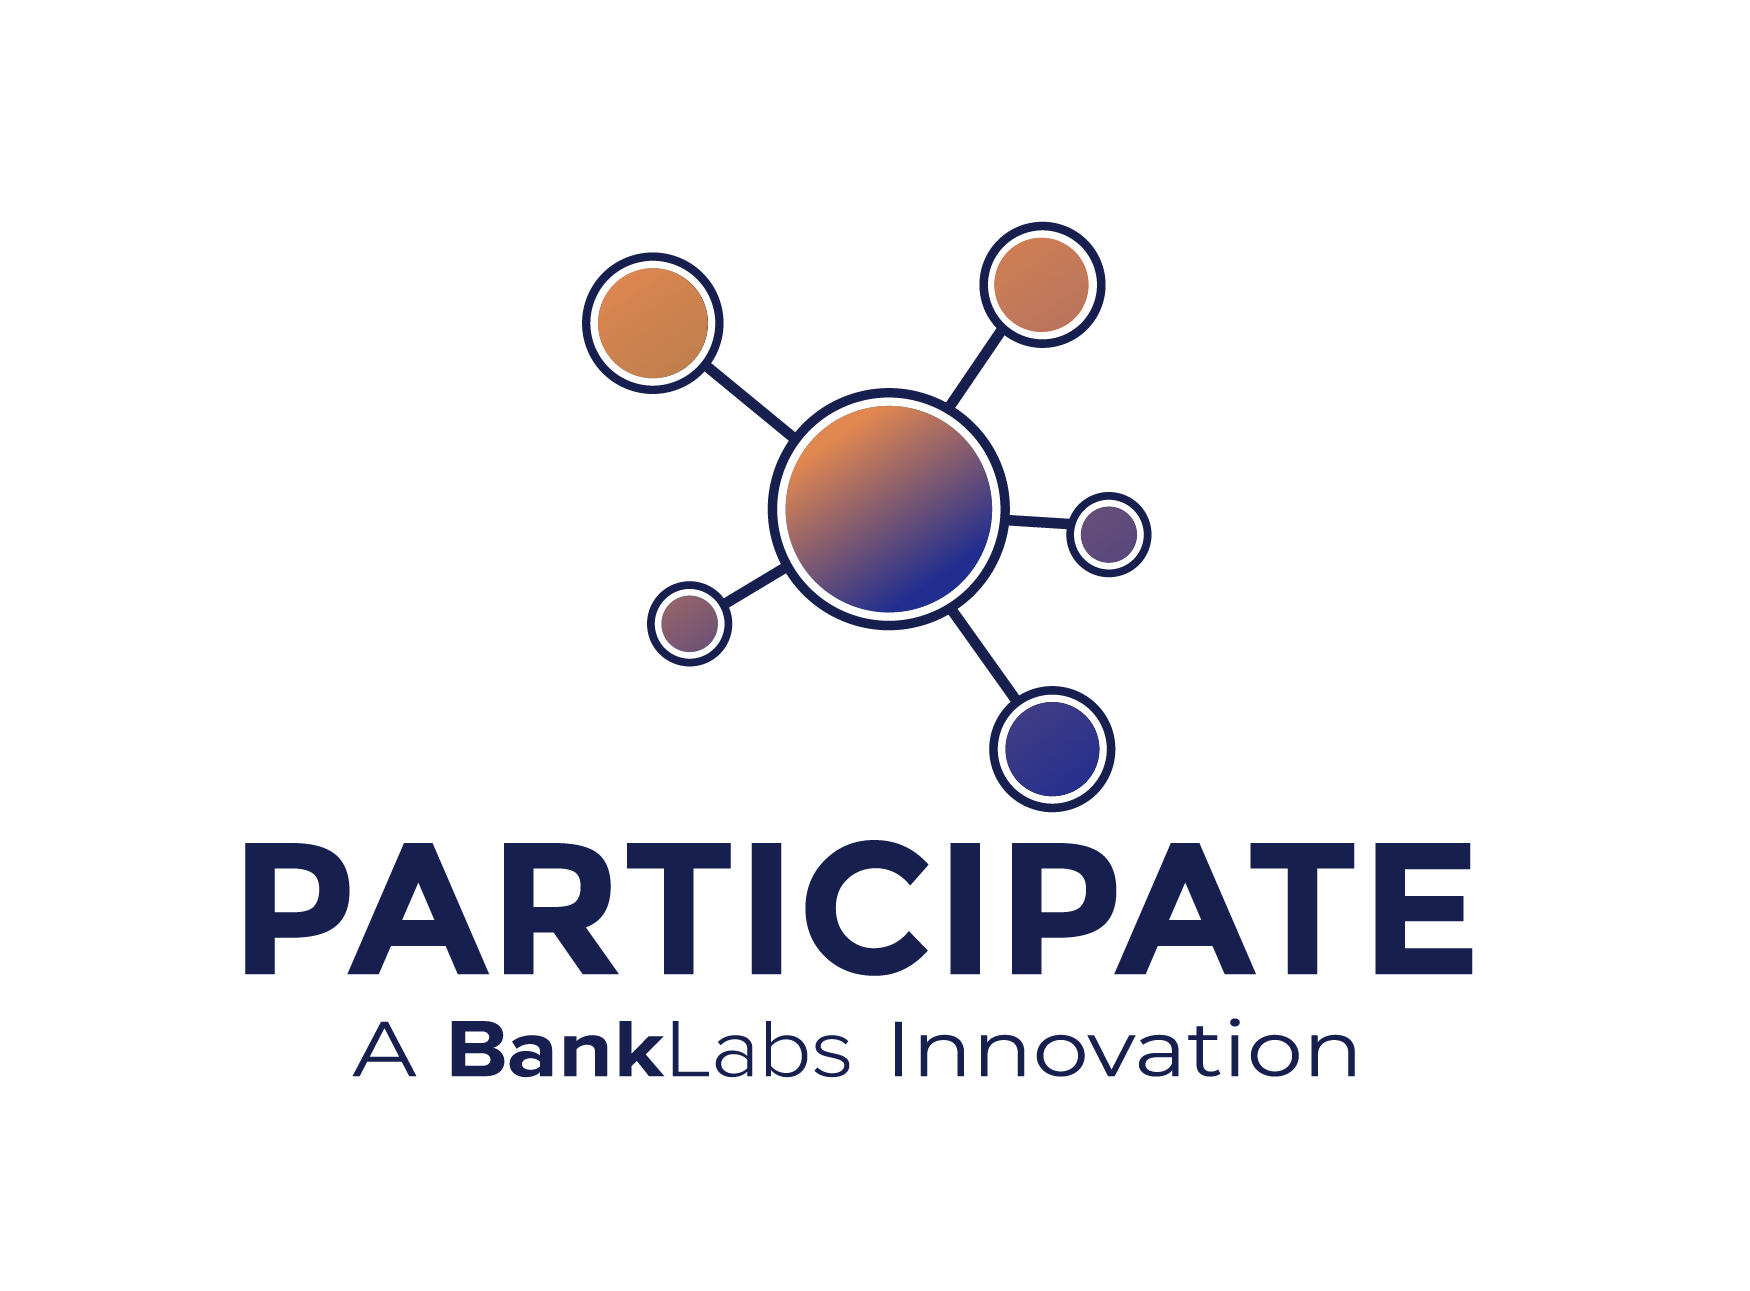 BankLabs’ Loan Participation Platform Secures Investment from FINTOP Capital & JAM FINTOP Banktech, and Launches New Spin-Out Company ‘Participate’